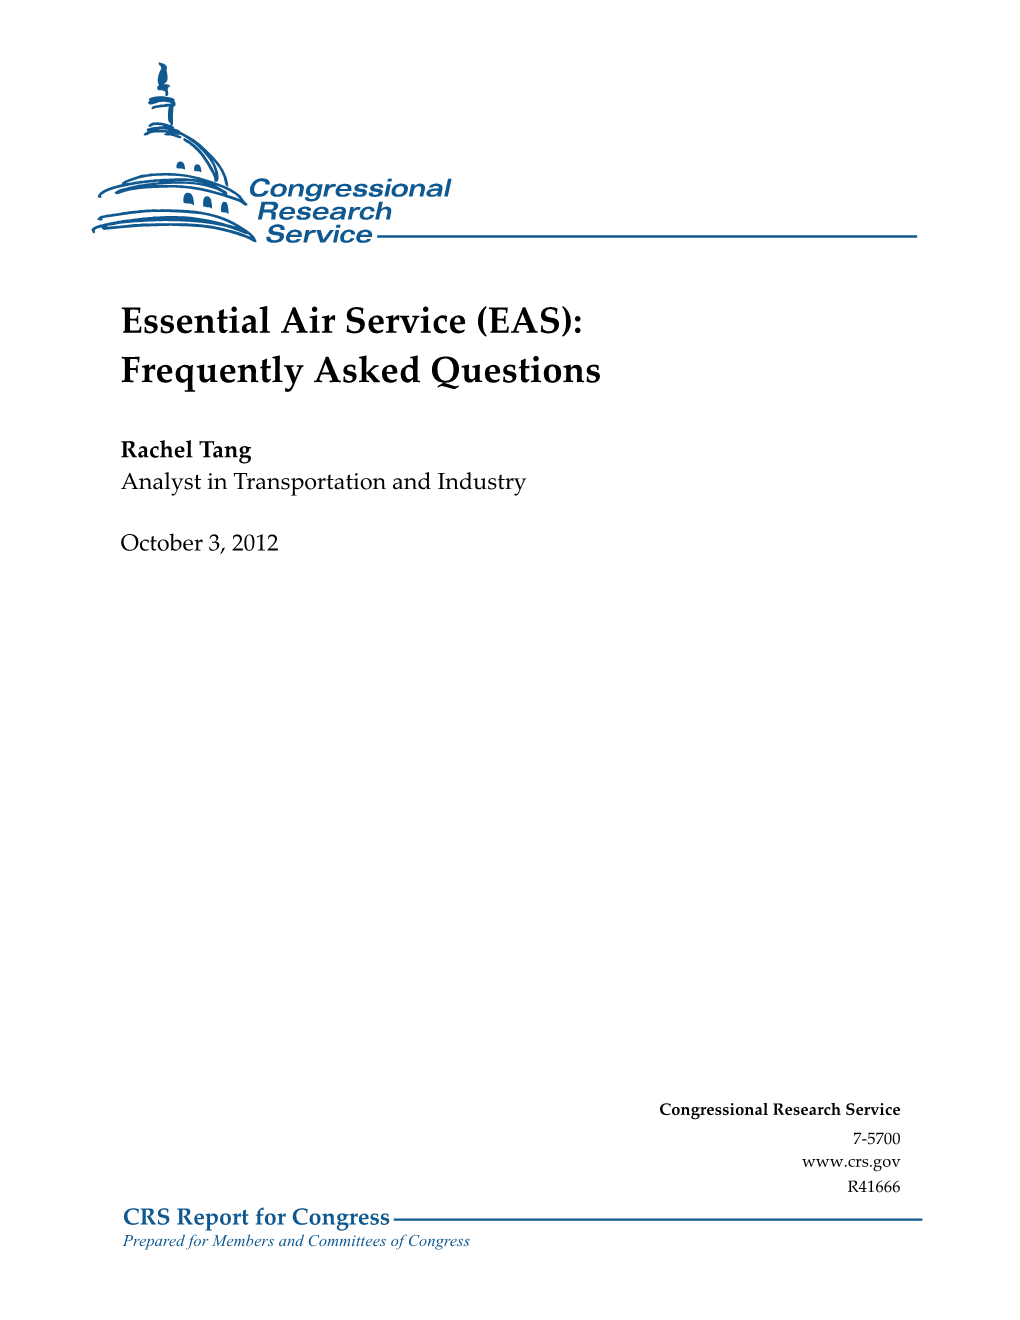 Essential Air Service (EAS): Frequently Asked Questions